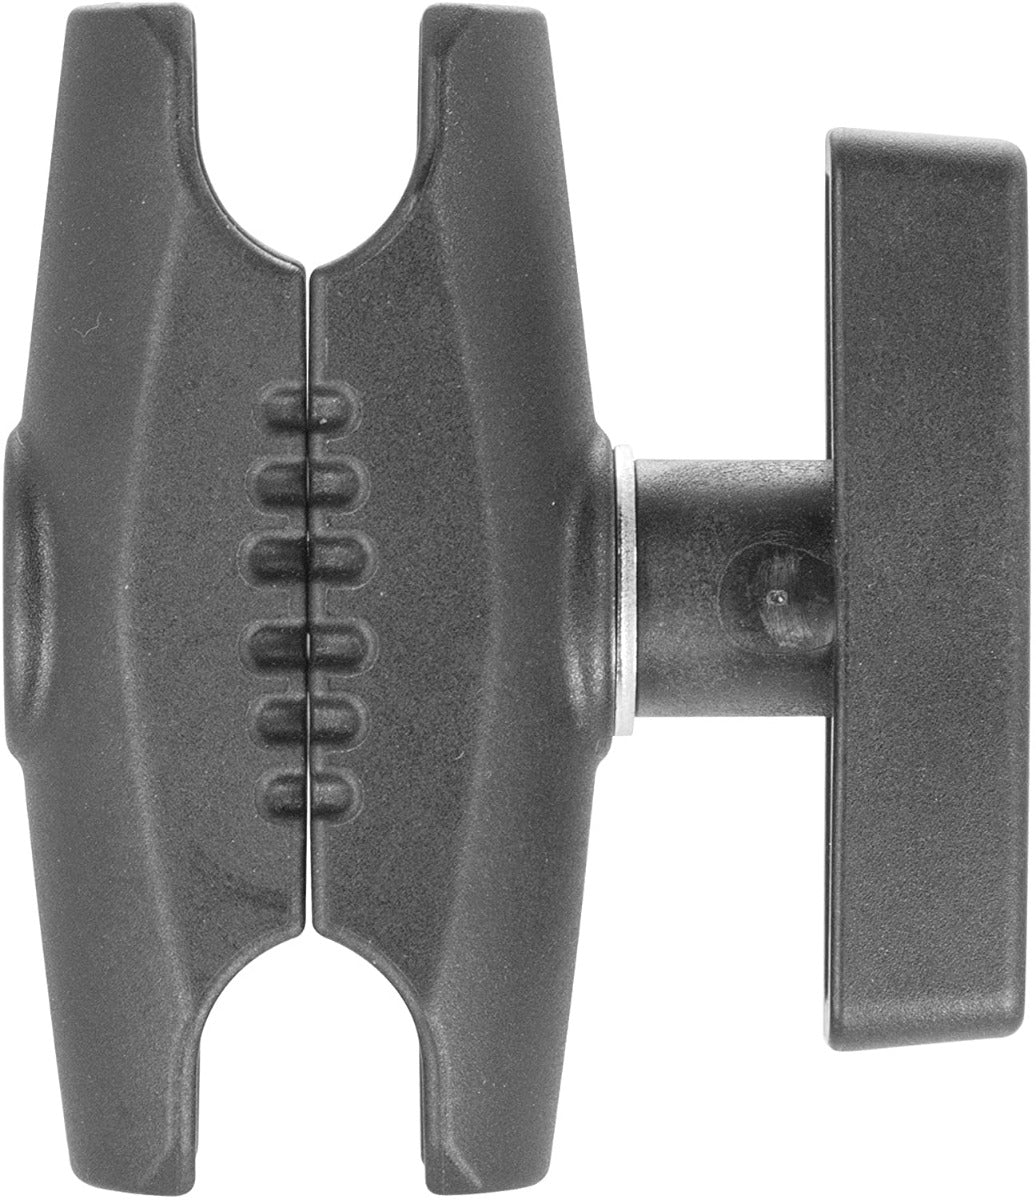 iBOLT™ Mounts- 3.5 inch Composite Arm for 38 mm / 1.5 inch Ball Joint